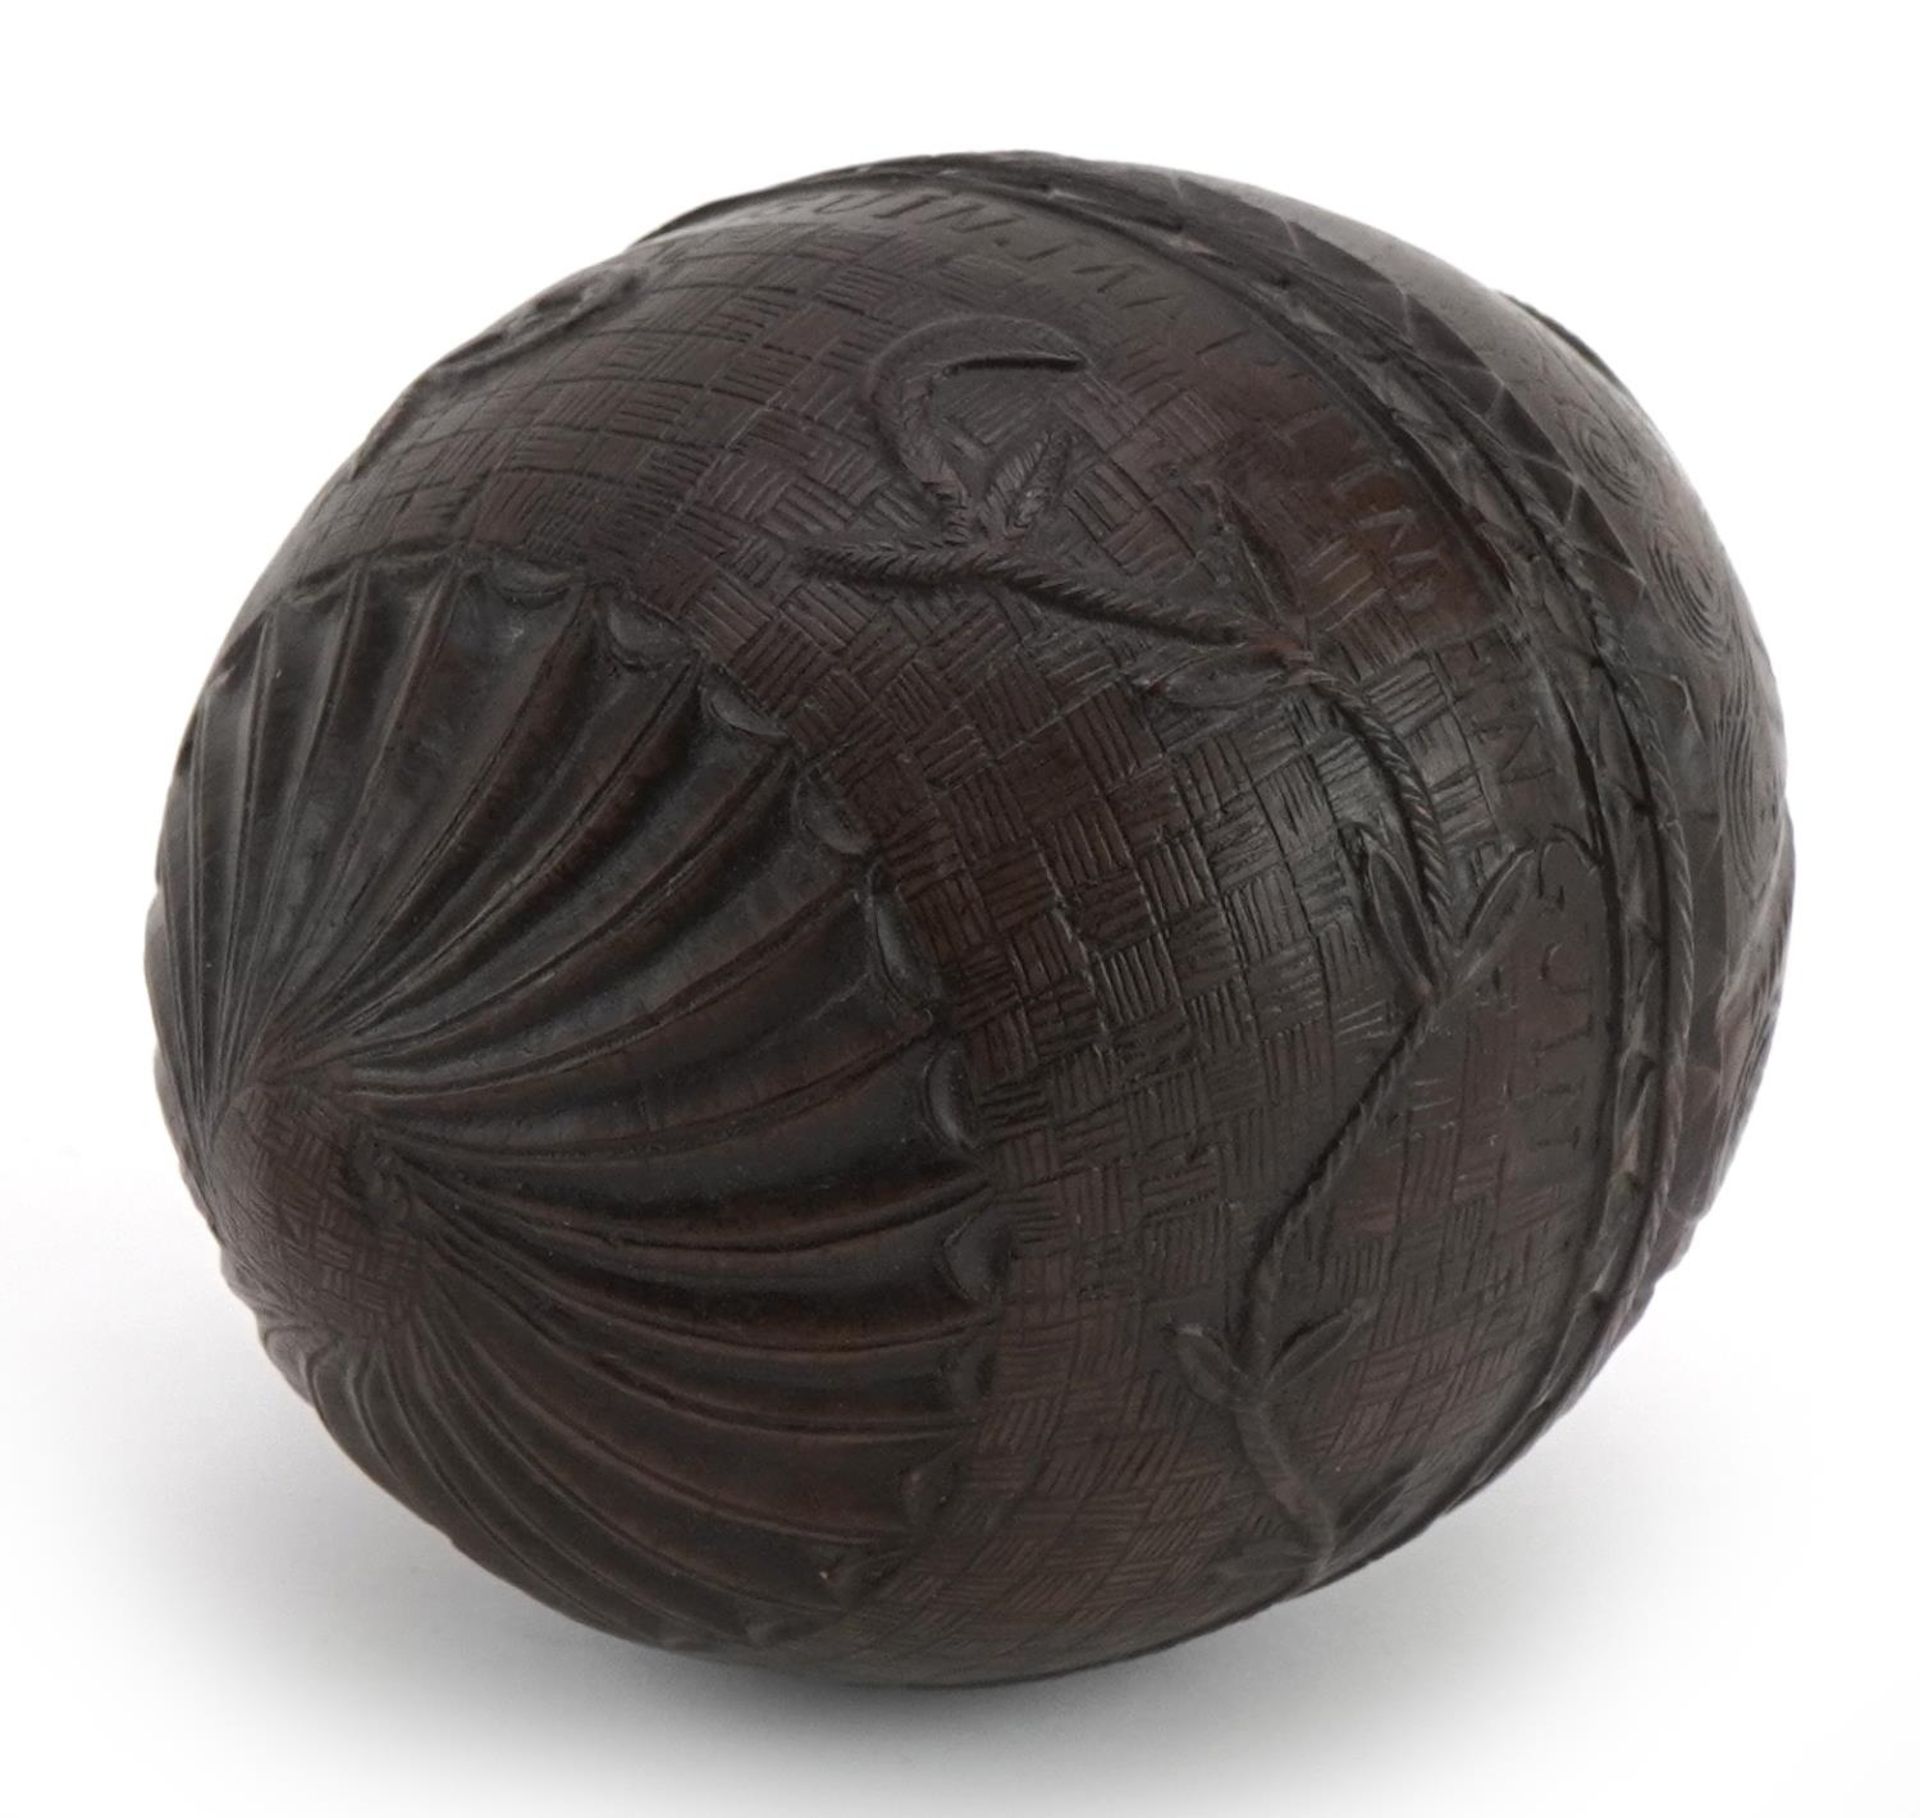 Antique coconut shell carved in the form of a bearded man inscribed Jane En Guin Martin EnGuin, 12. - Image 2 of 3